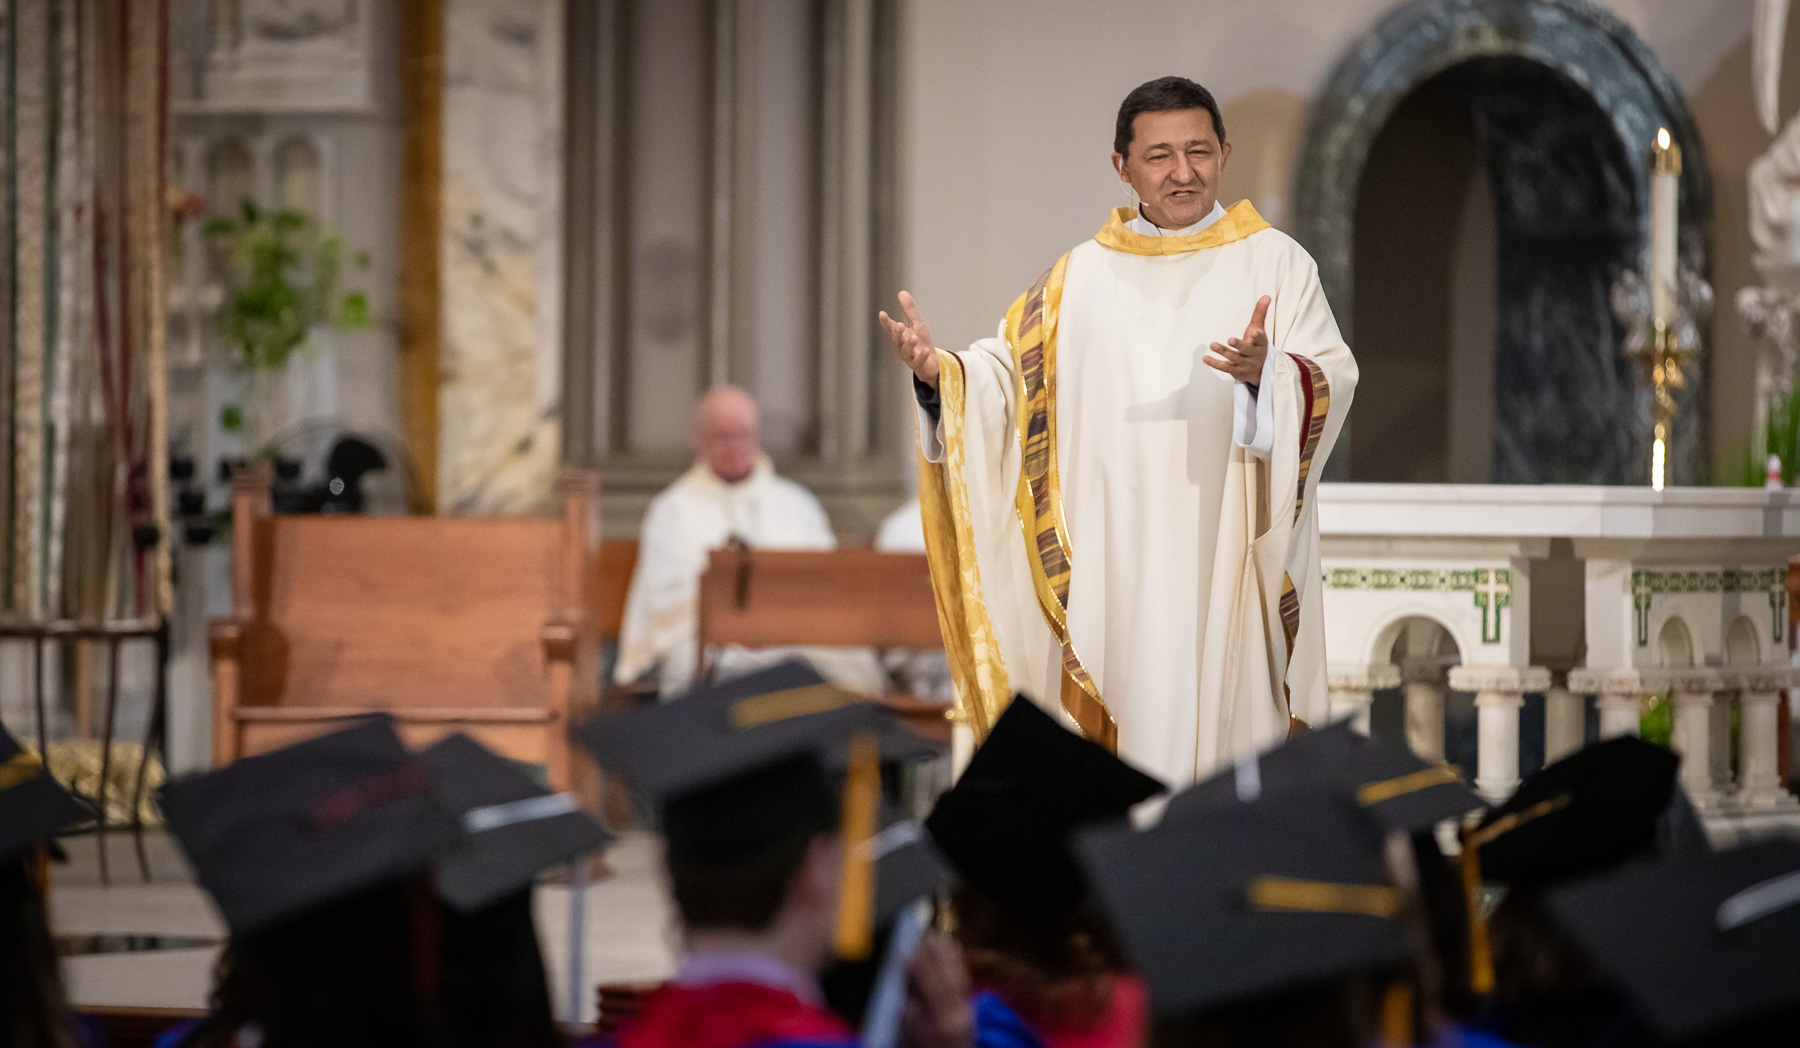 Rev. Guillermo Campuzano, C.M., vice president, Division of Mission and Ministry, presided over this year’s Baccalaureate Mass.